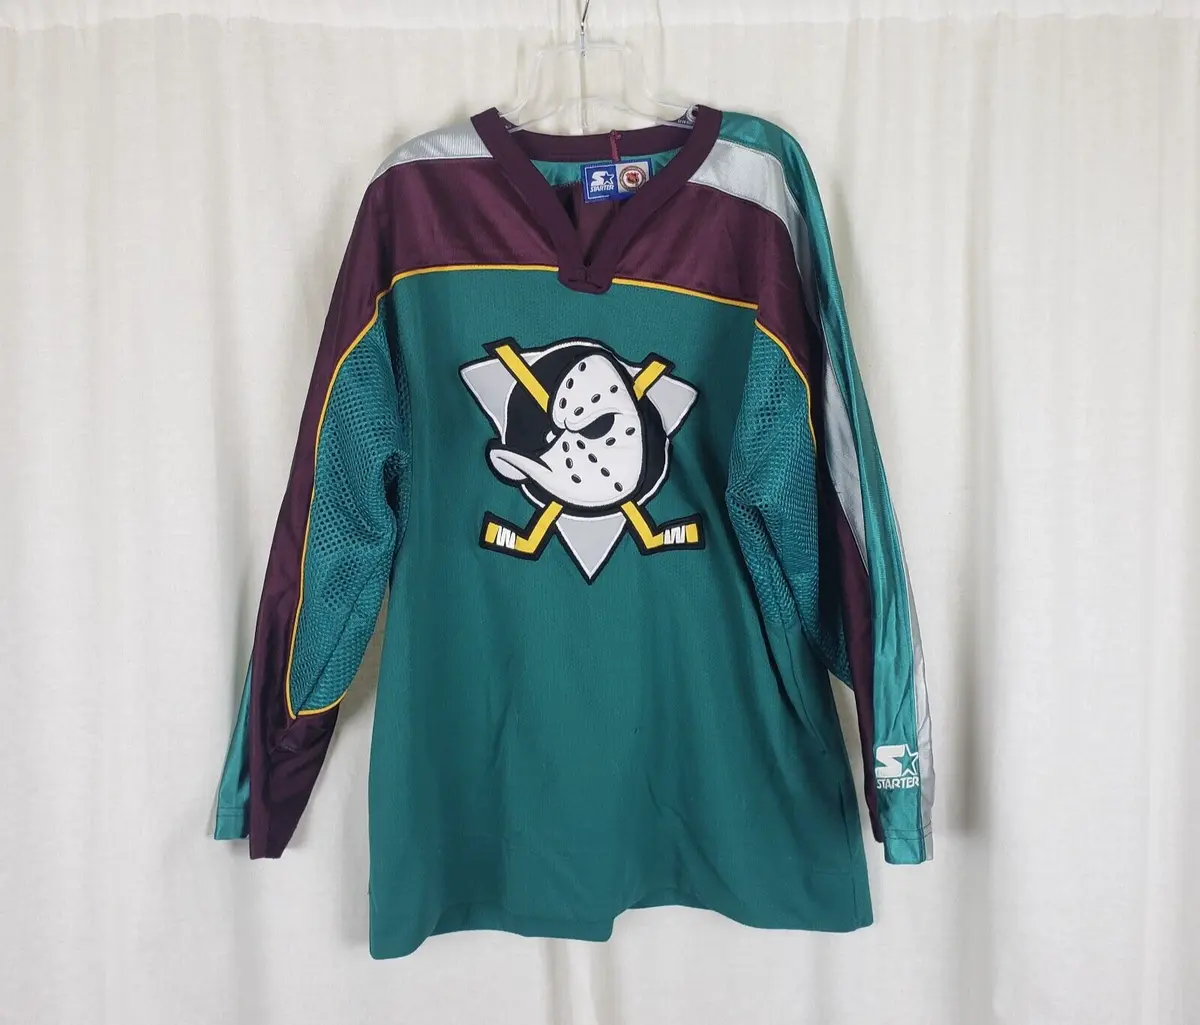 An Anaheim Mighty Ducks jersey is seen in a hockey supply store